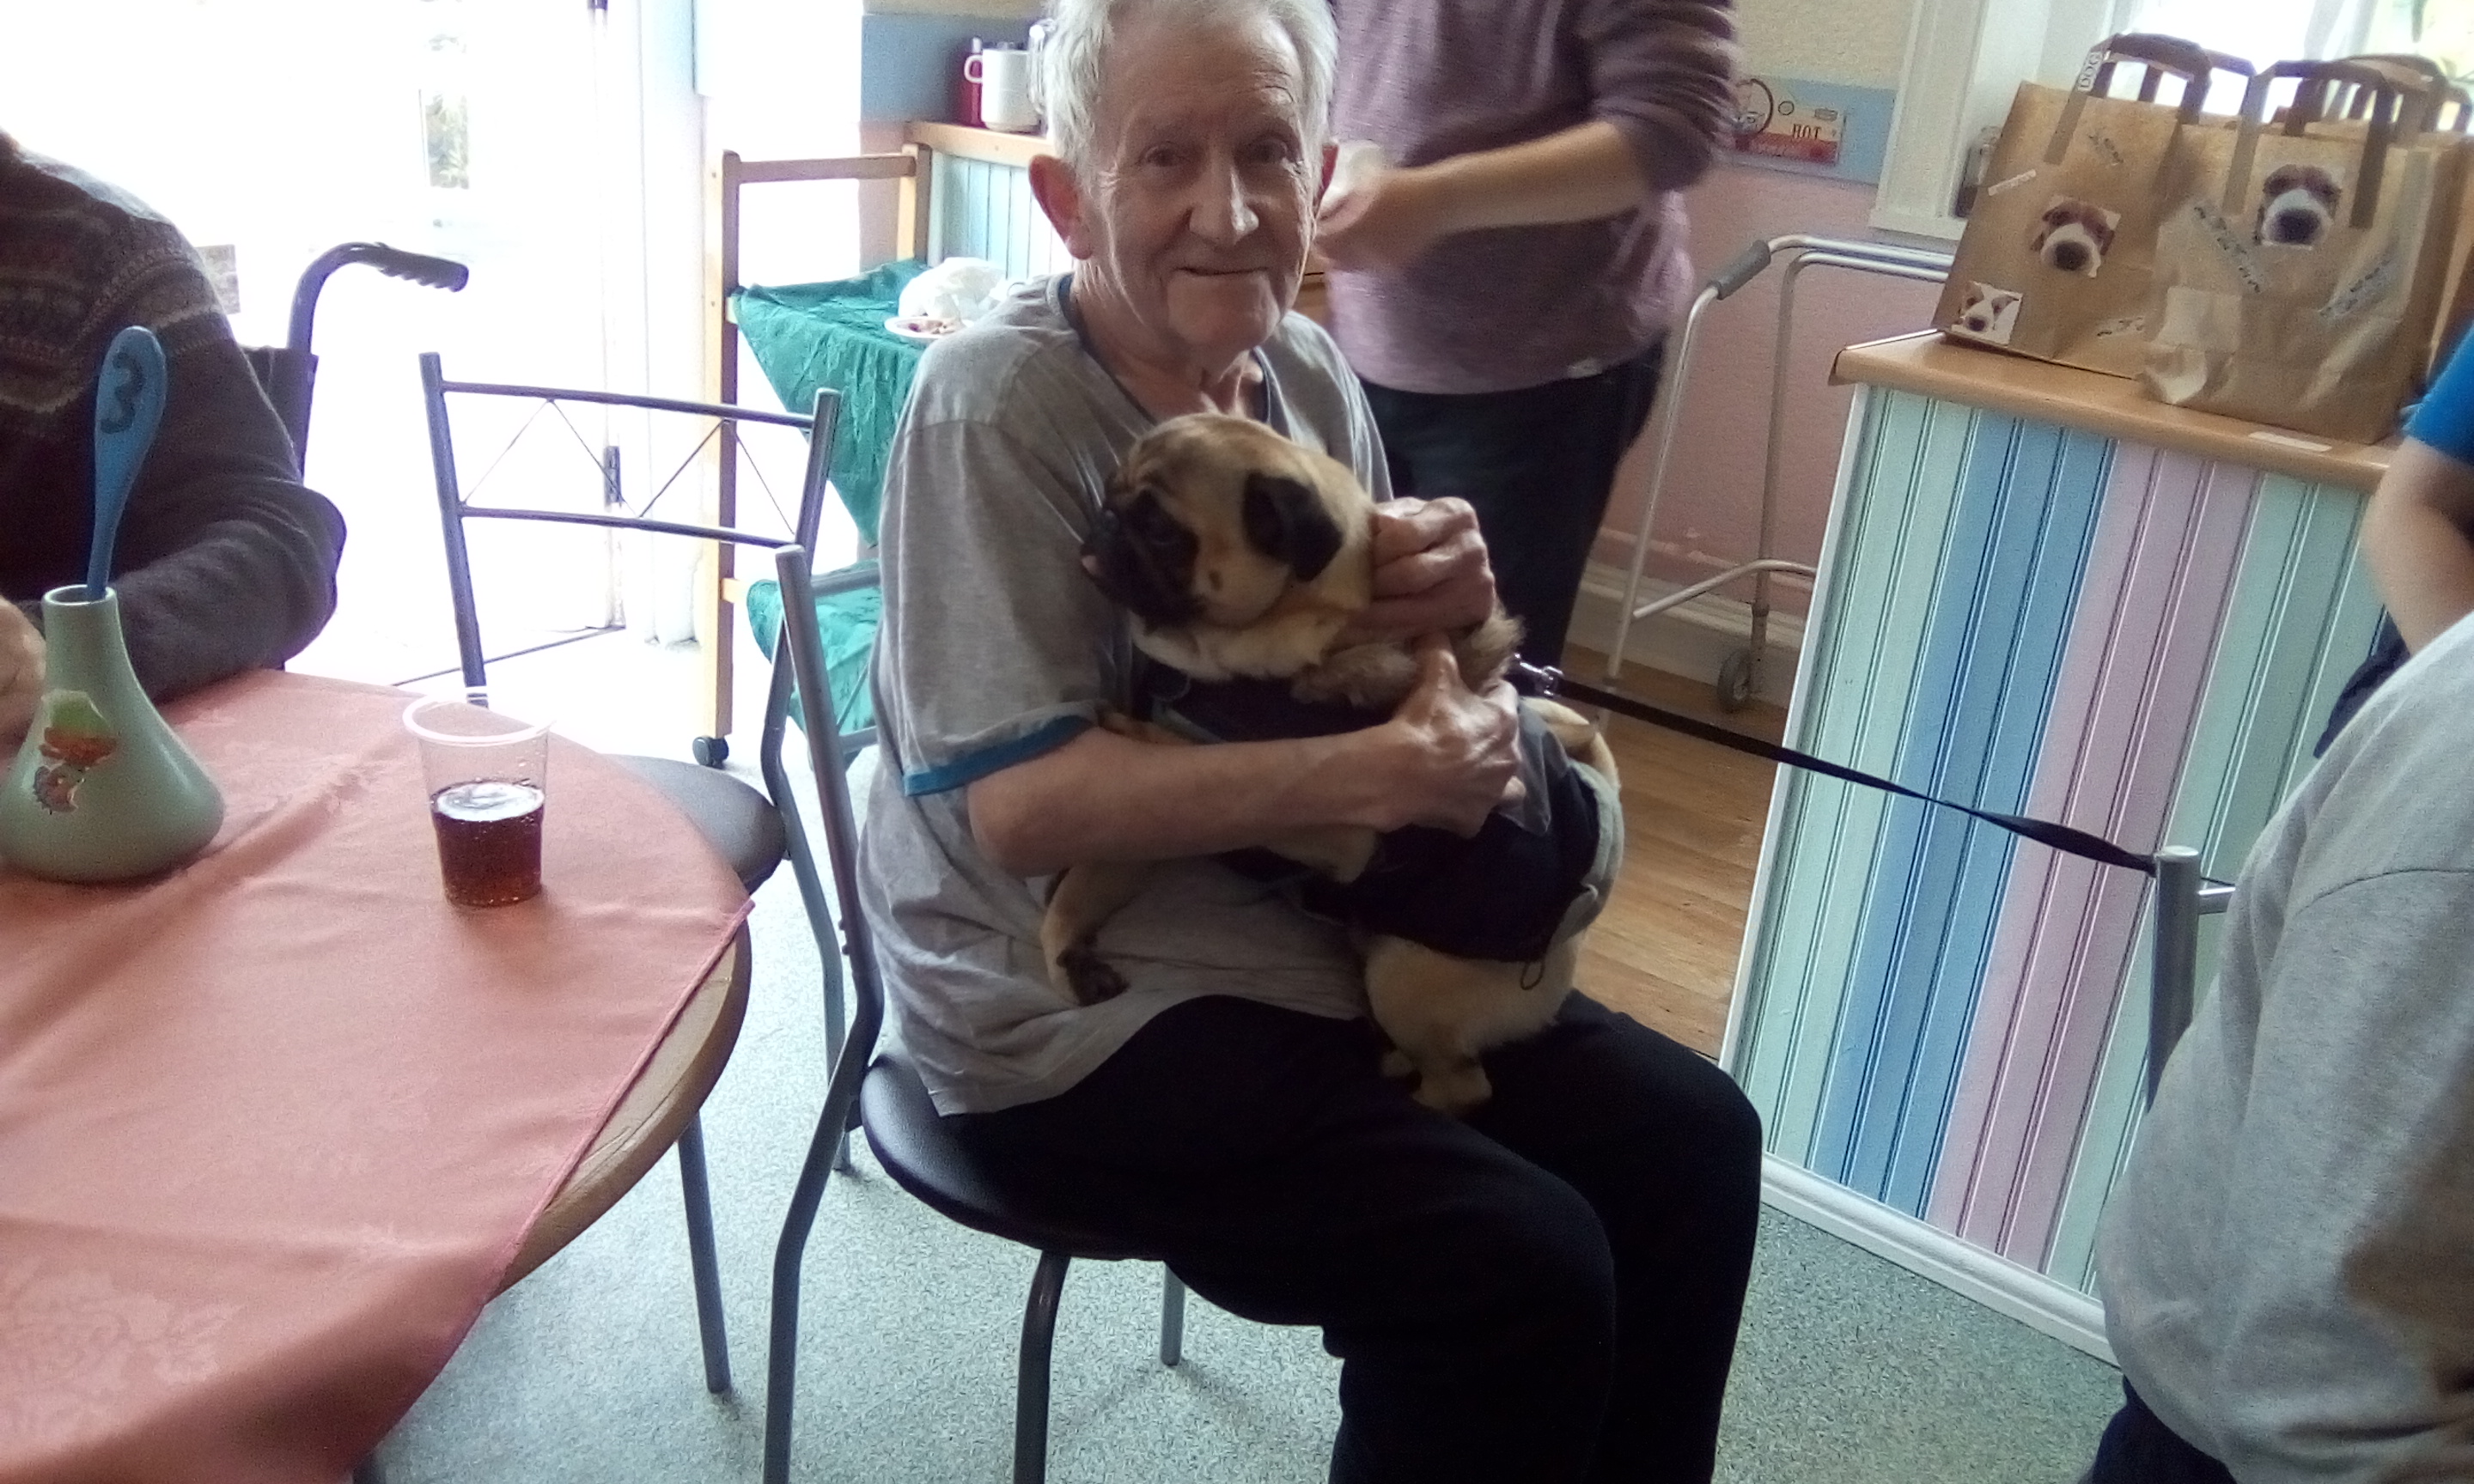 Victoria House Care Centre Dog Show: Key Healthcare is dedicated to caring for elderly residents in safe. We have multiple dementia care homes including our care home middlesbrough, our care home St. Helen and care home saltburn. We excel in monitoring and improving care levels.